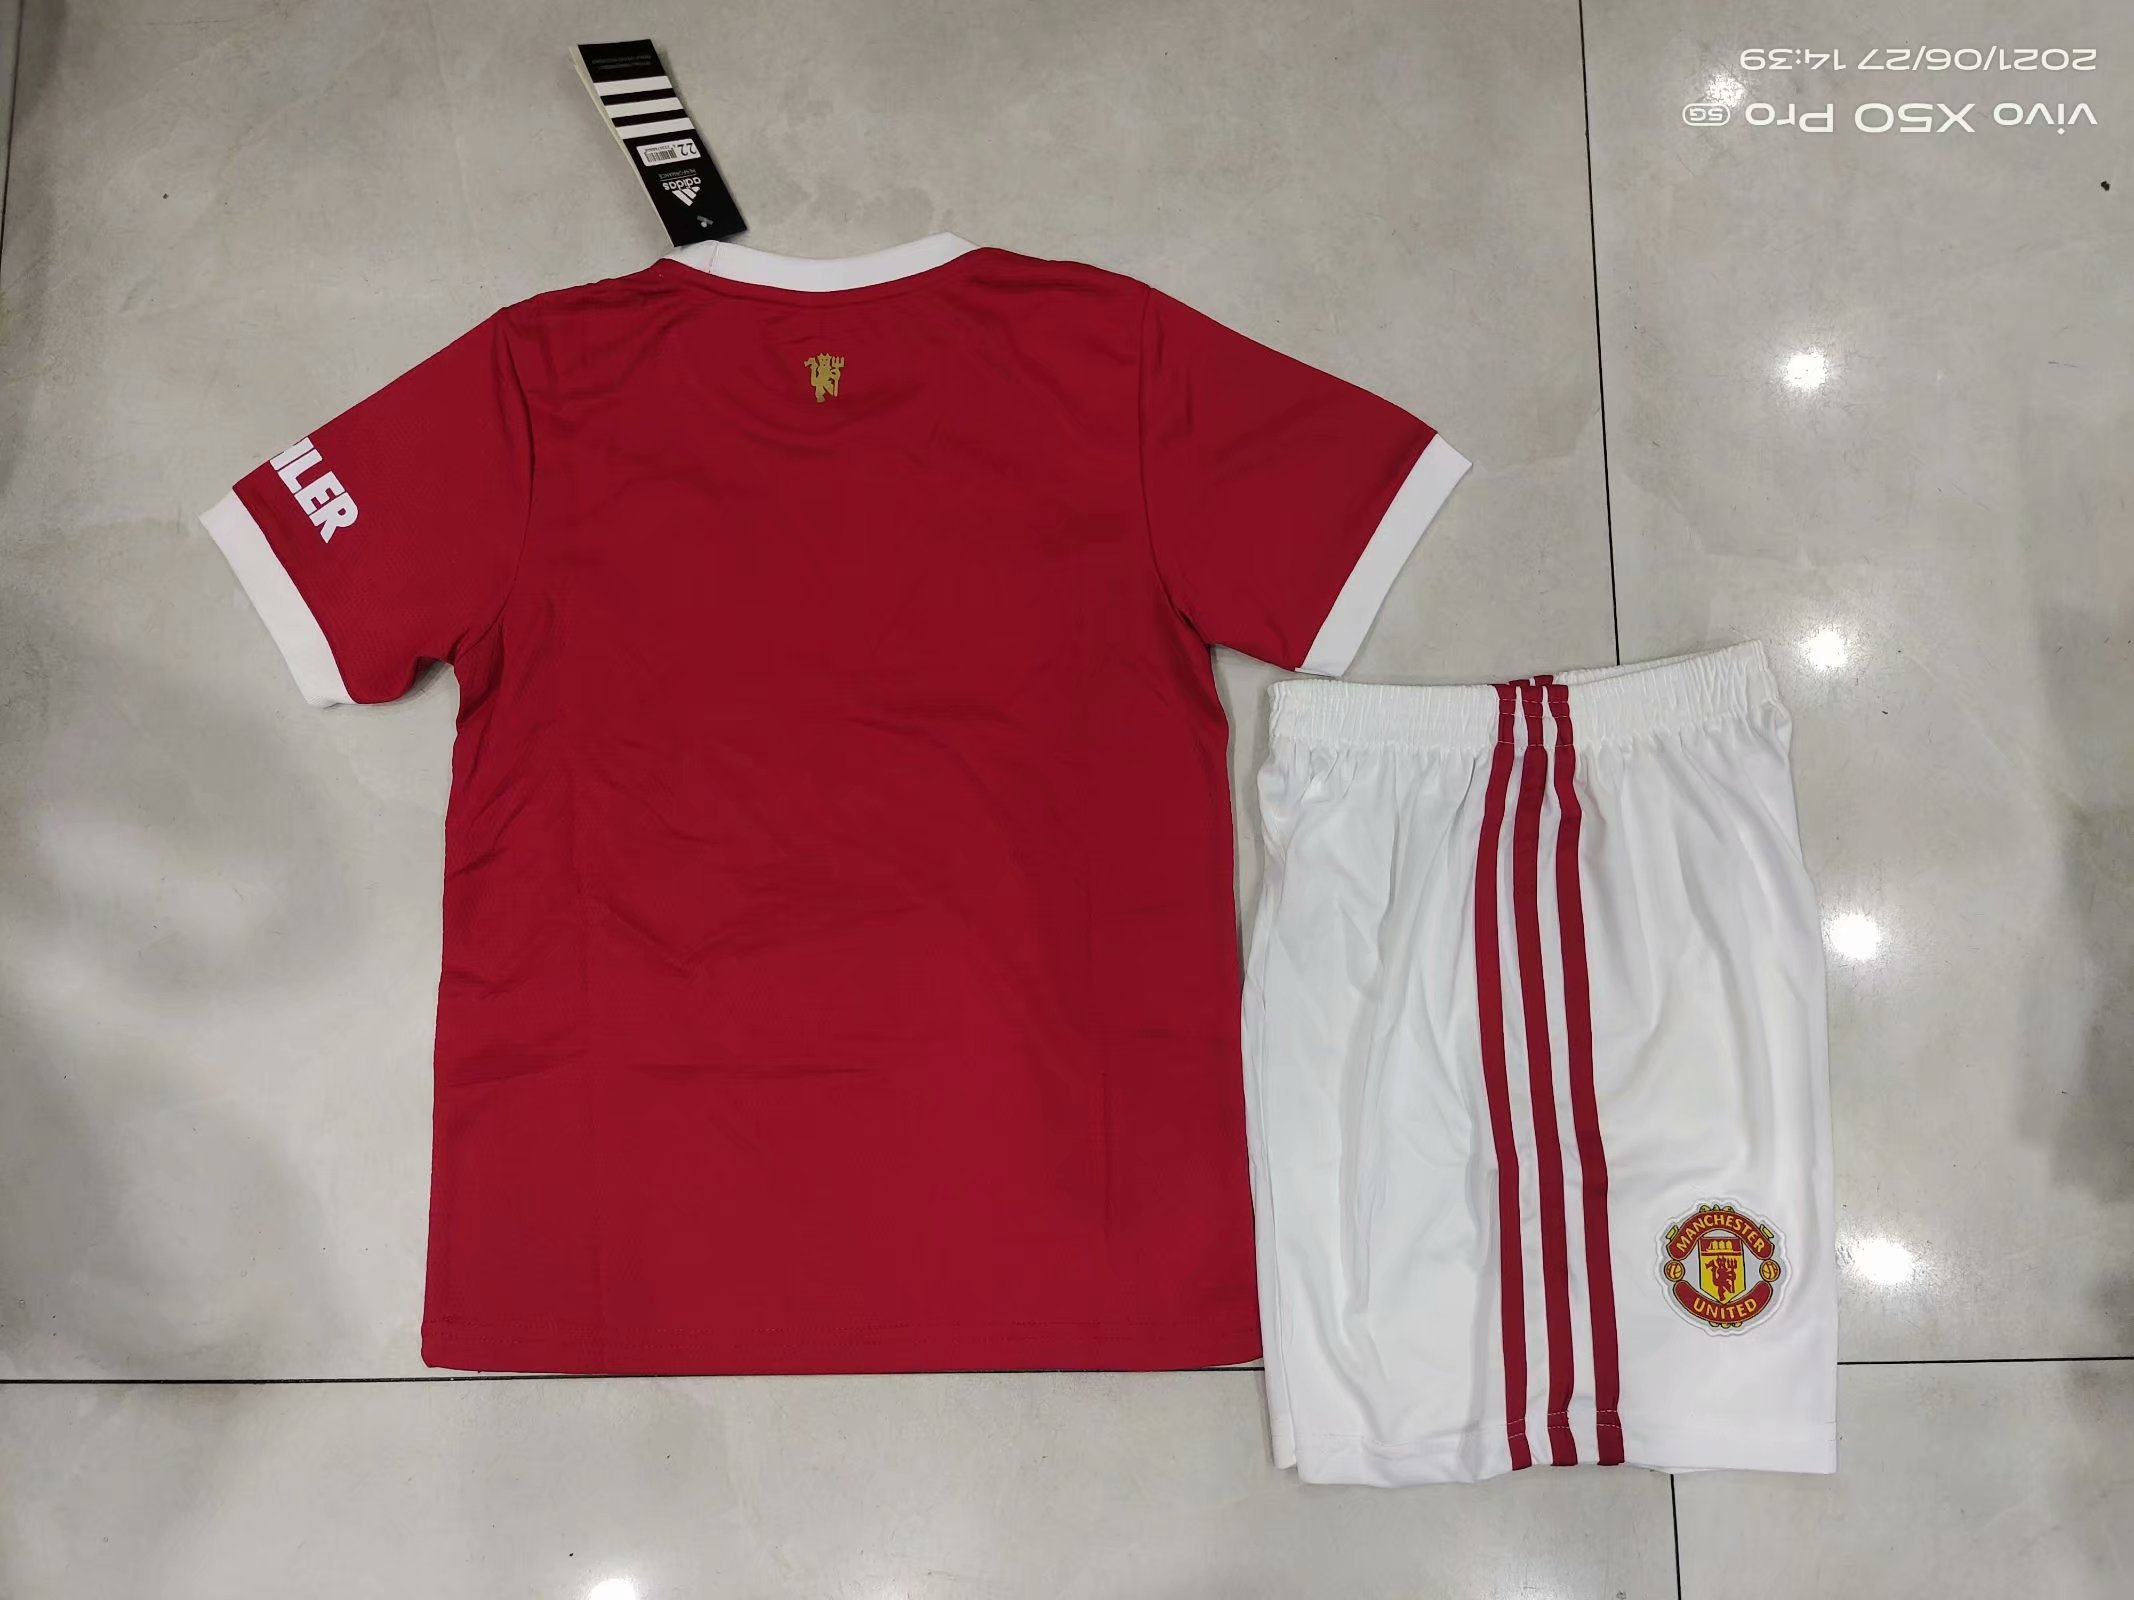 Manchester United Soccer Jersey + Short Replica Home Youth 2021/22